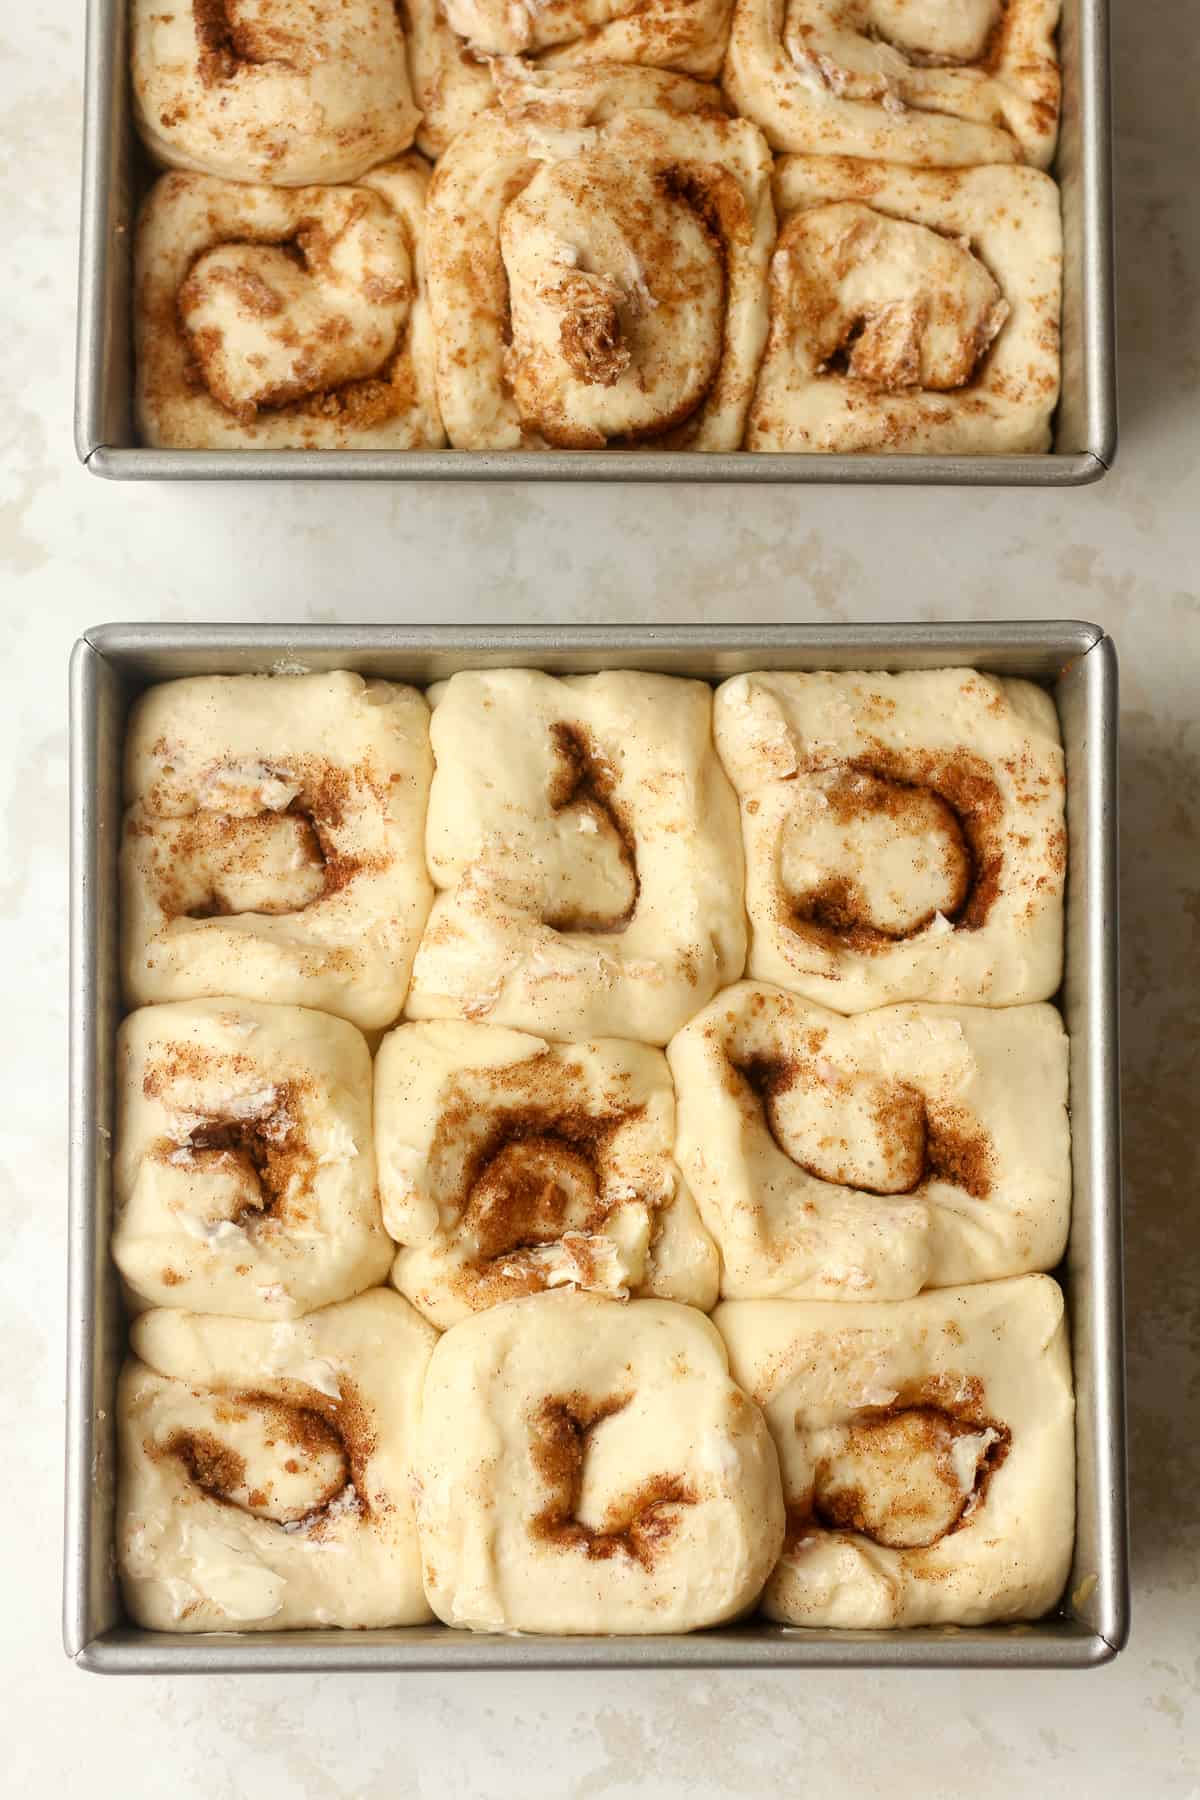 Overhead view of the pans of rolls after rising.